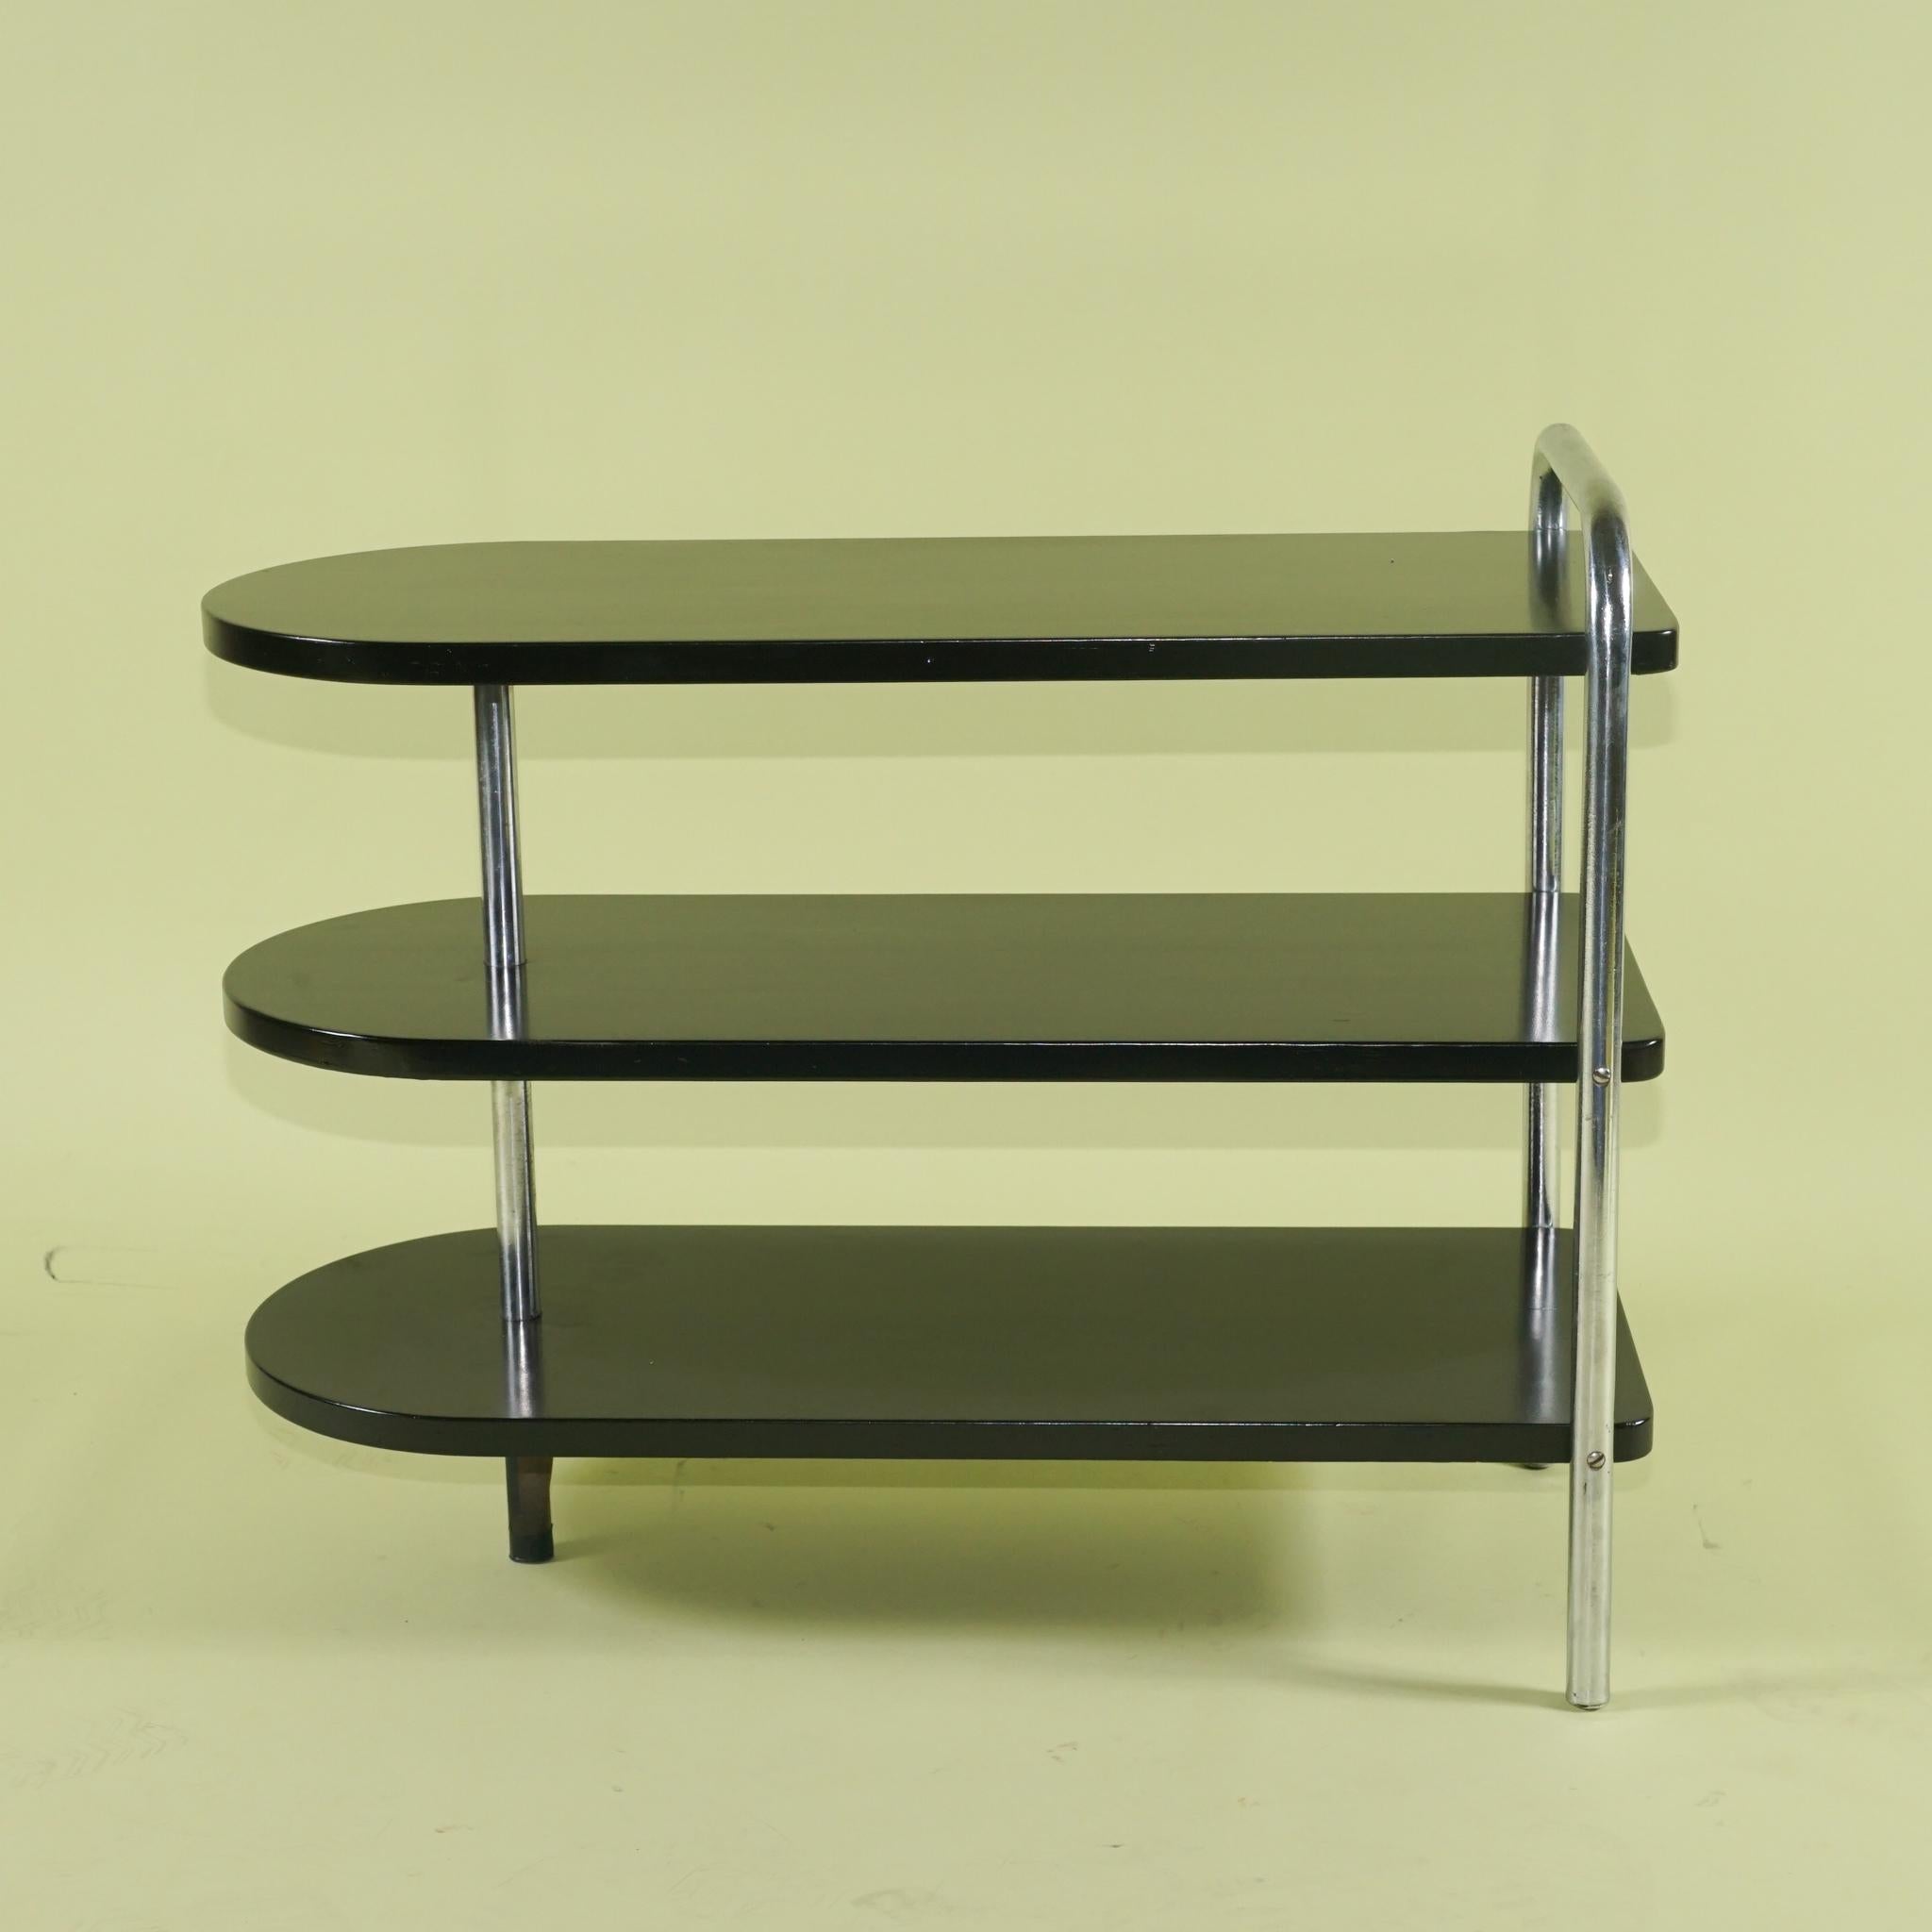 This pair of modernist low tables designed by Wolfgang Hoffmann for Howell were made circa 1938 and are in excellent almost original condition. The chrome is completely original and has almost no pitting or discoloration. The lacquer appears to be